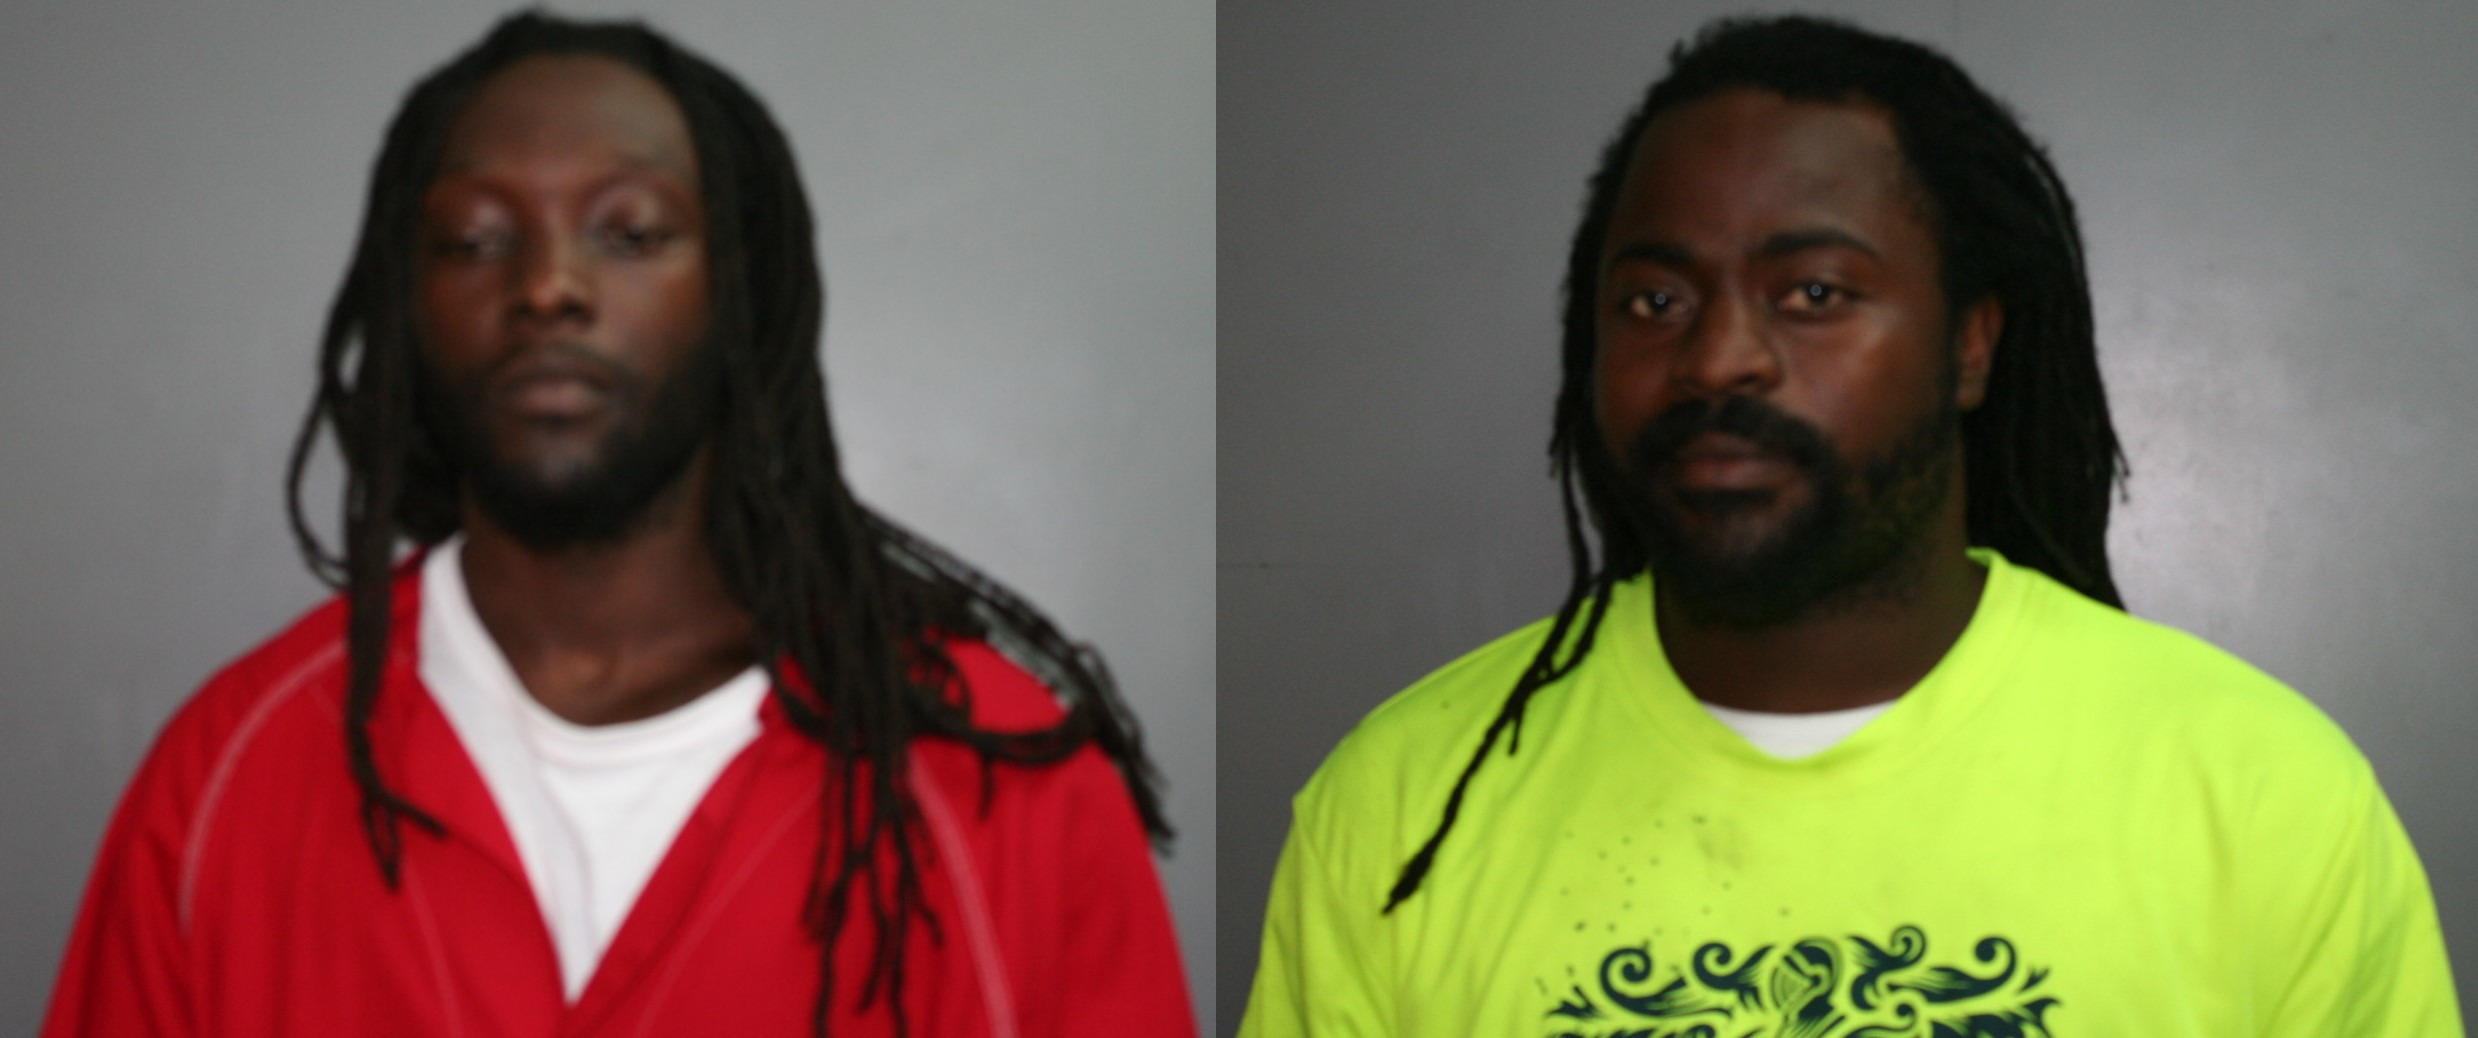 Police Arrest 2 St. Croix Men In Connection With Fatal Shooting At Cane Bay in 2013